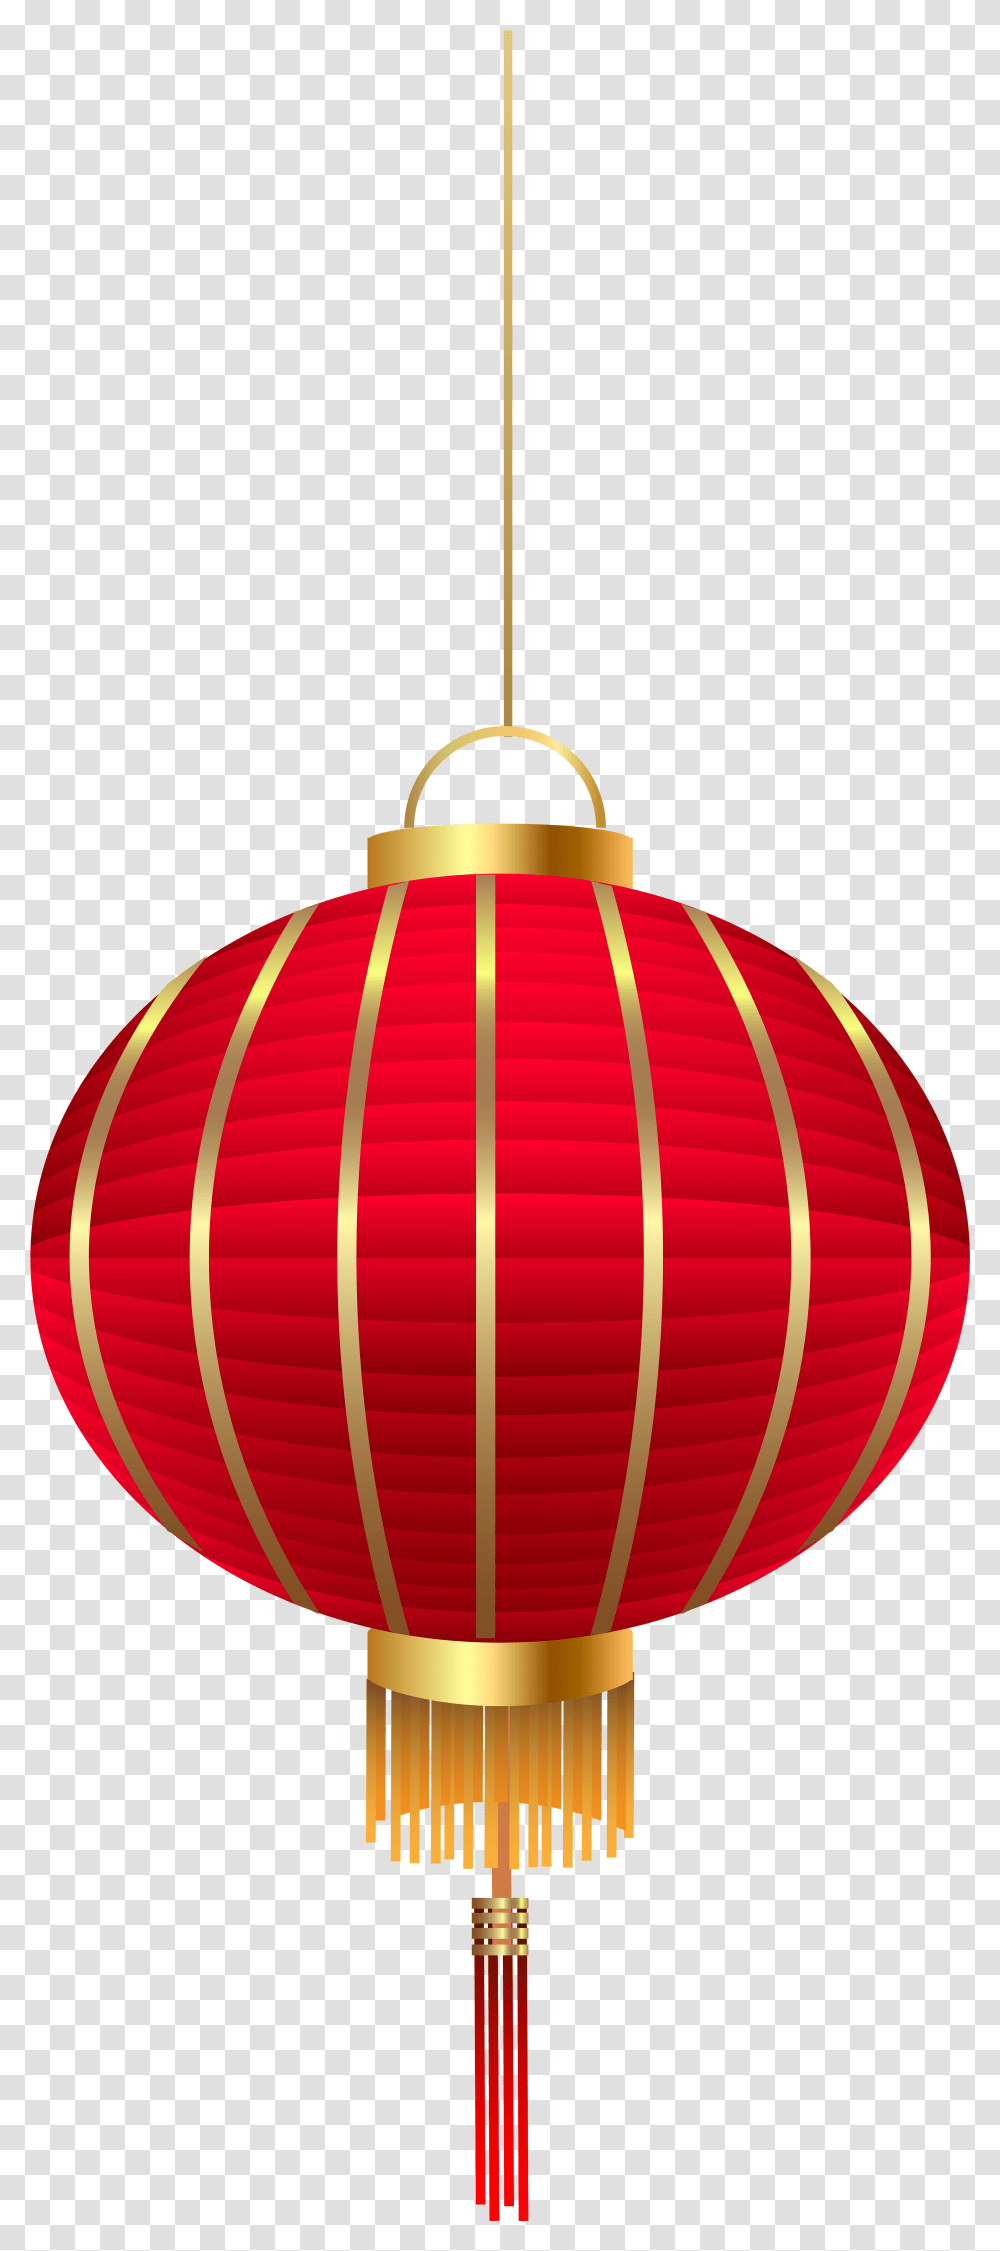 Lamp Clipart Light Ball Free Chinese Hanging Lanterns, Lampshade Transparent Png